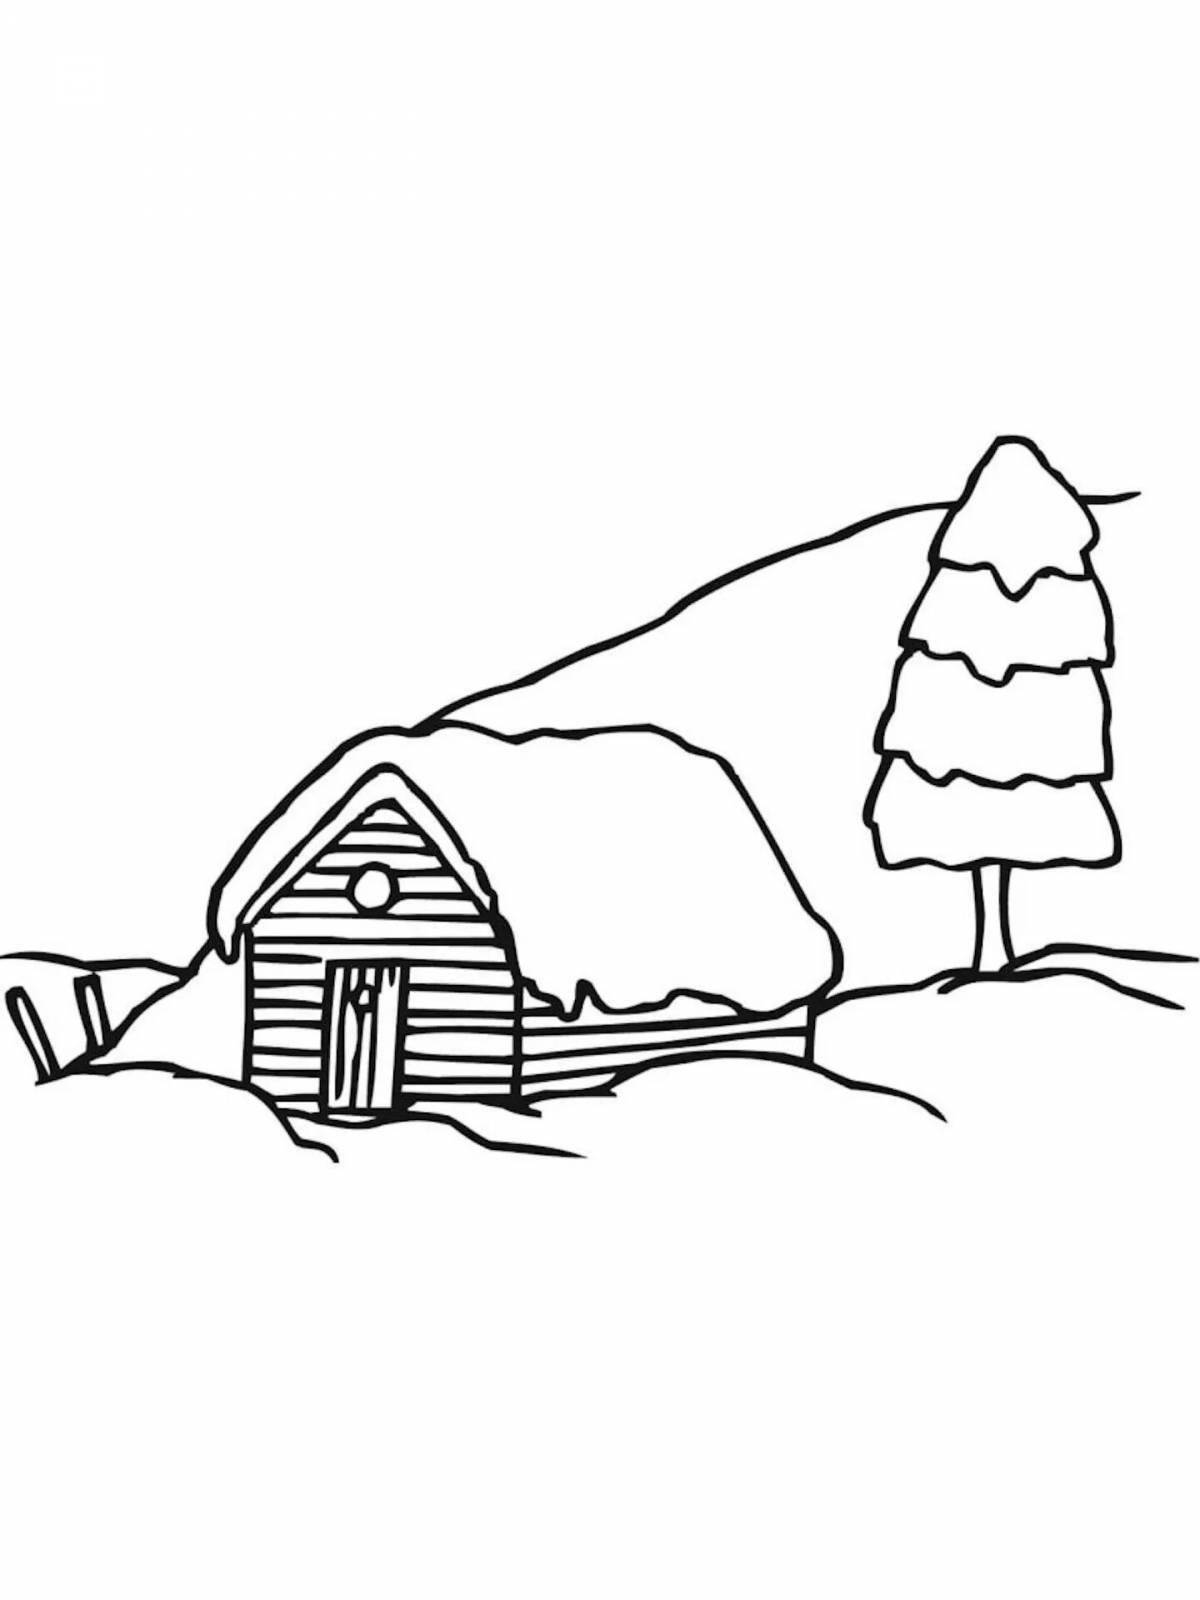 Coloring page magical village in winter